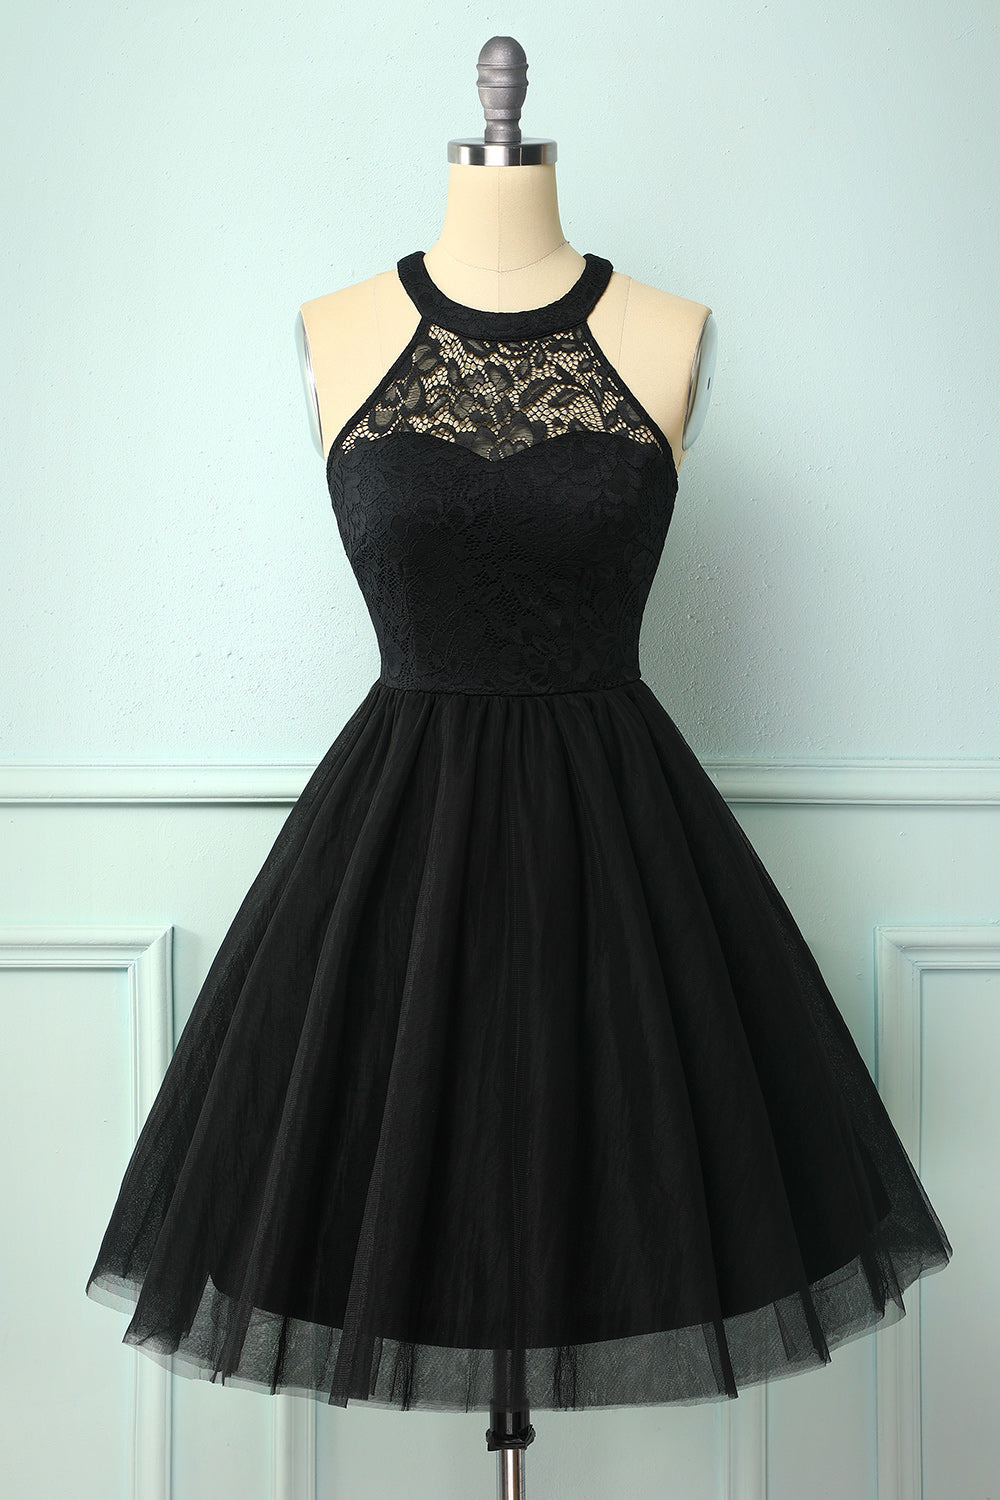 Black Short Party Dress Outfits, Prom Dresses Ball Gown